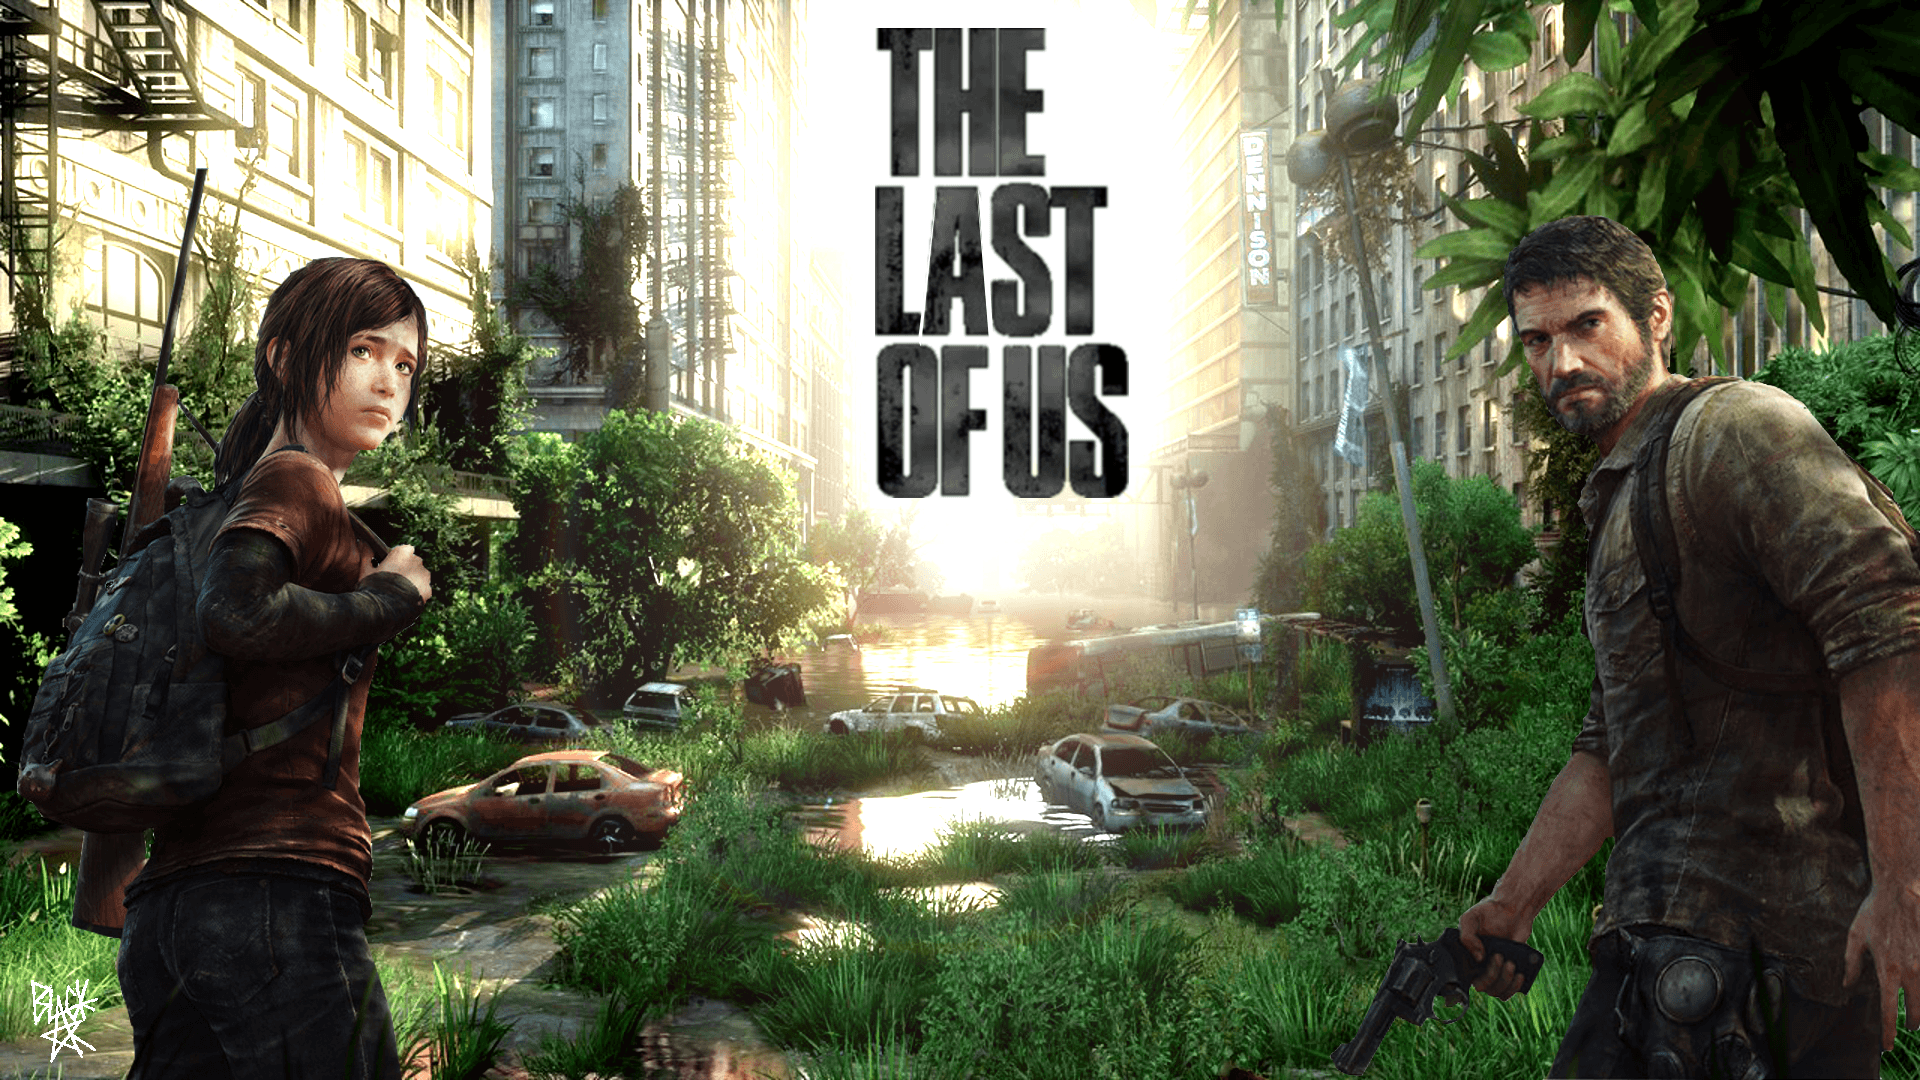 The Last Of Us Computer Wallpapers, Desk 4K Backgrounds